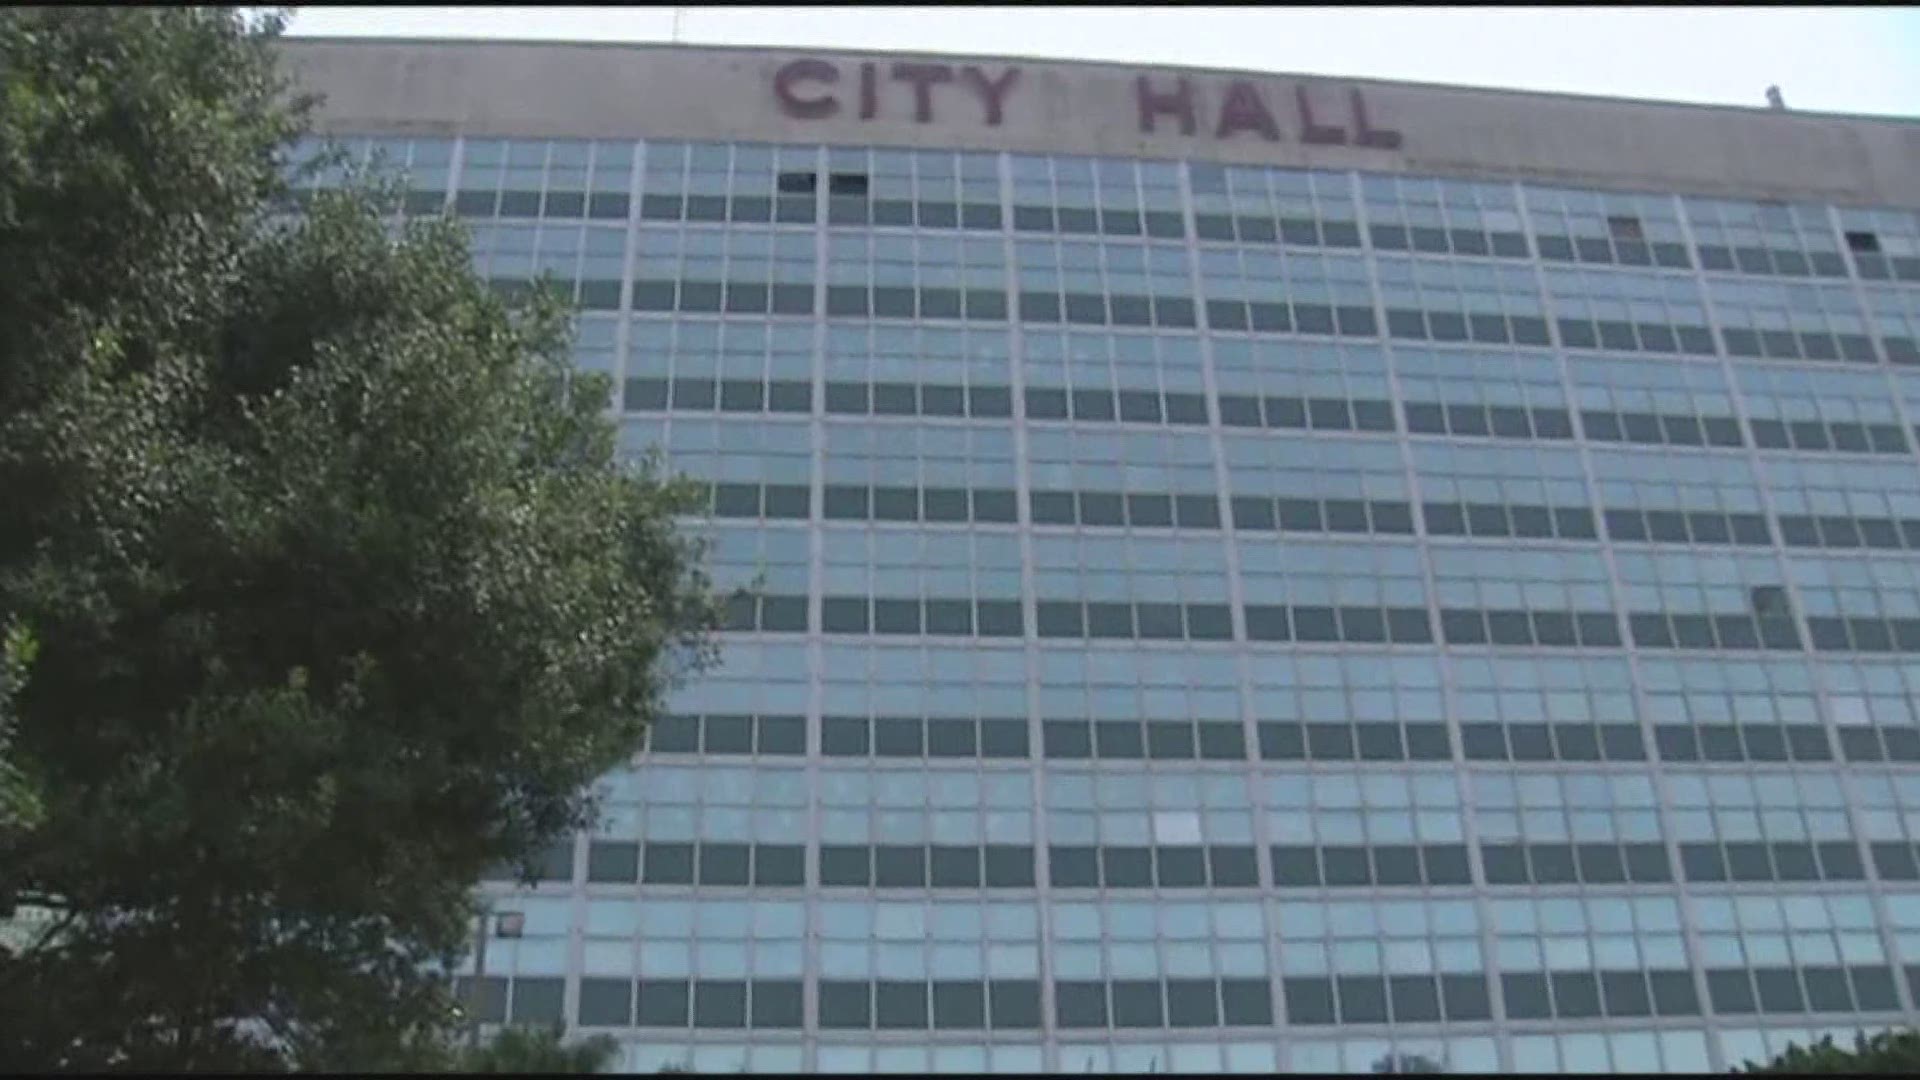 Plans to move New Orleans City Hall to the Municipal Auditorium have been scaled back and residents of Tremé are happy to hear the news.